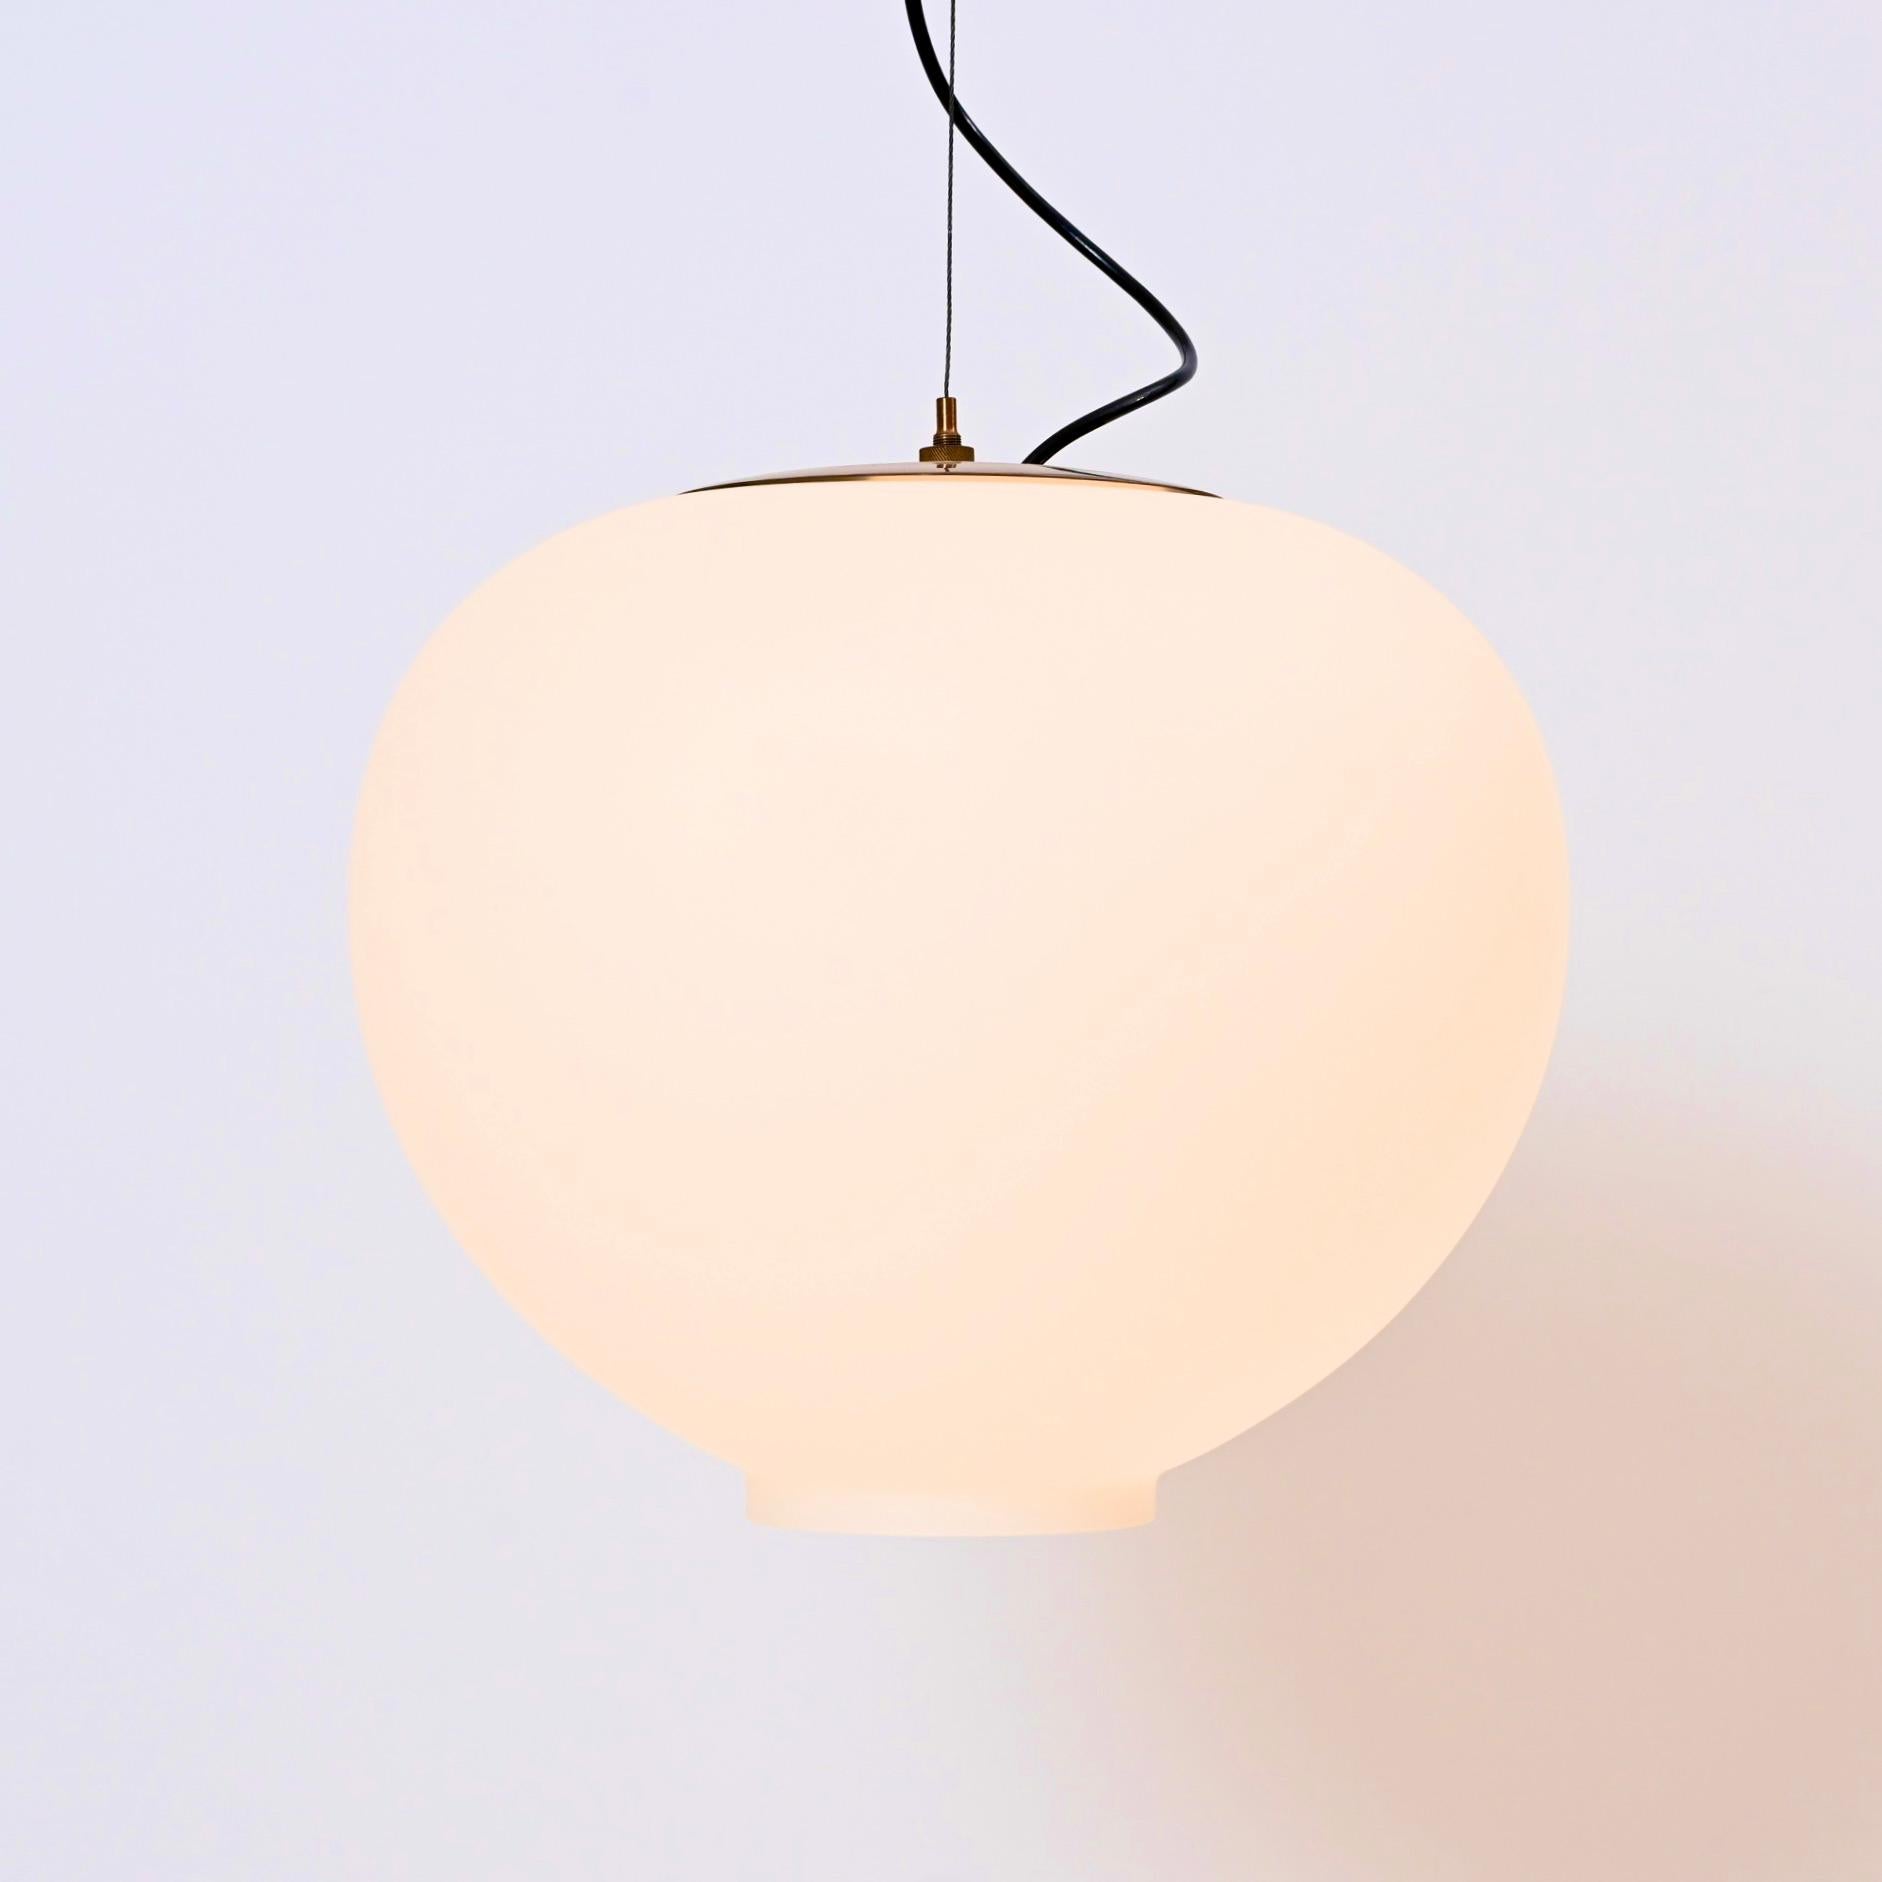 Mid-Century Modern Wire-Suspended Opaline Glass Ceiling Pendant by Stilnovo, Italy, circa 1955